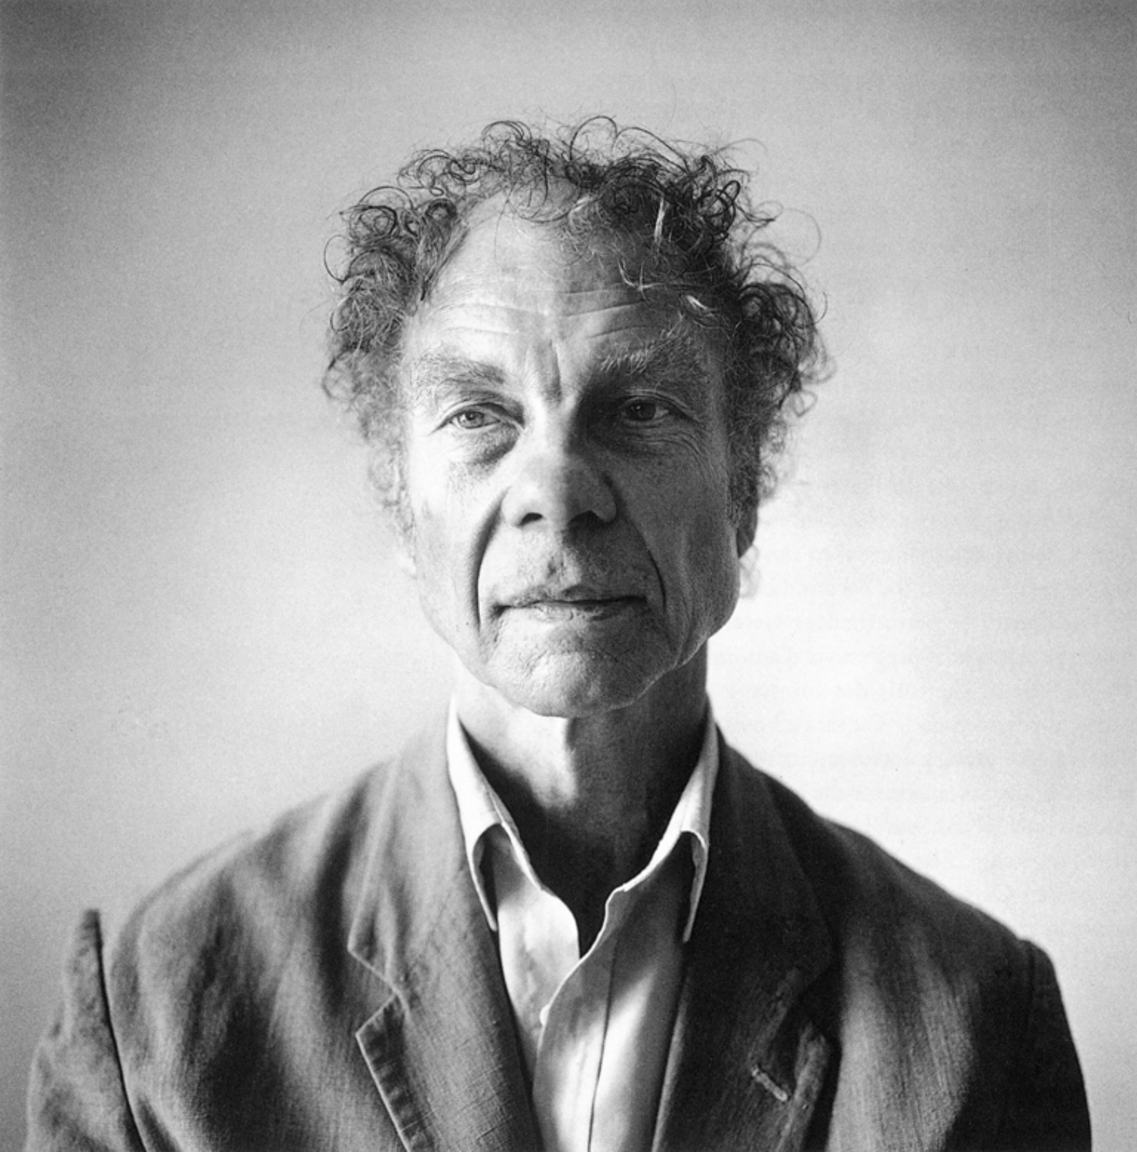 Merce Cunningham. Photo by Peter Hujar ca. 1987.
Image courtesy of the Merce Cunningham Trust, all rights reserved.